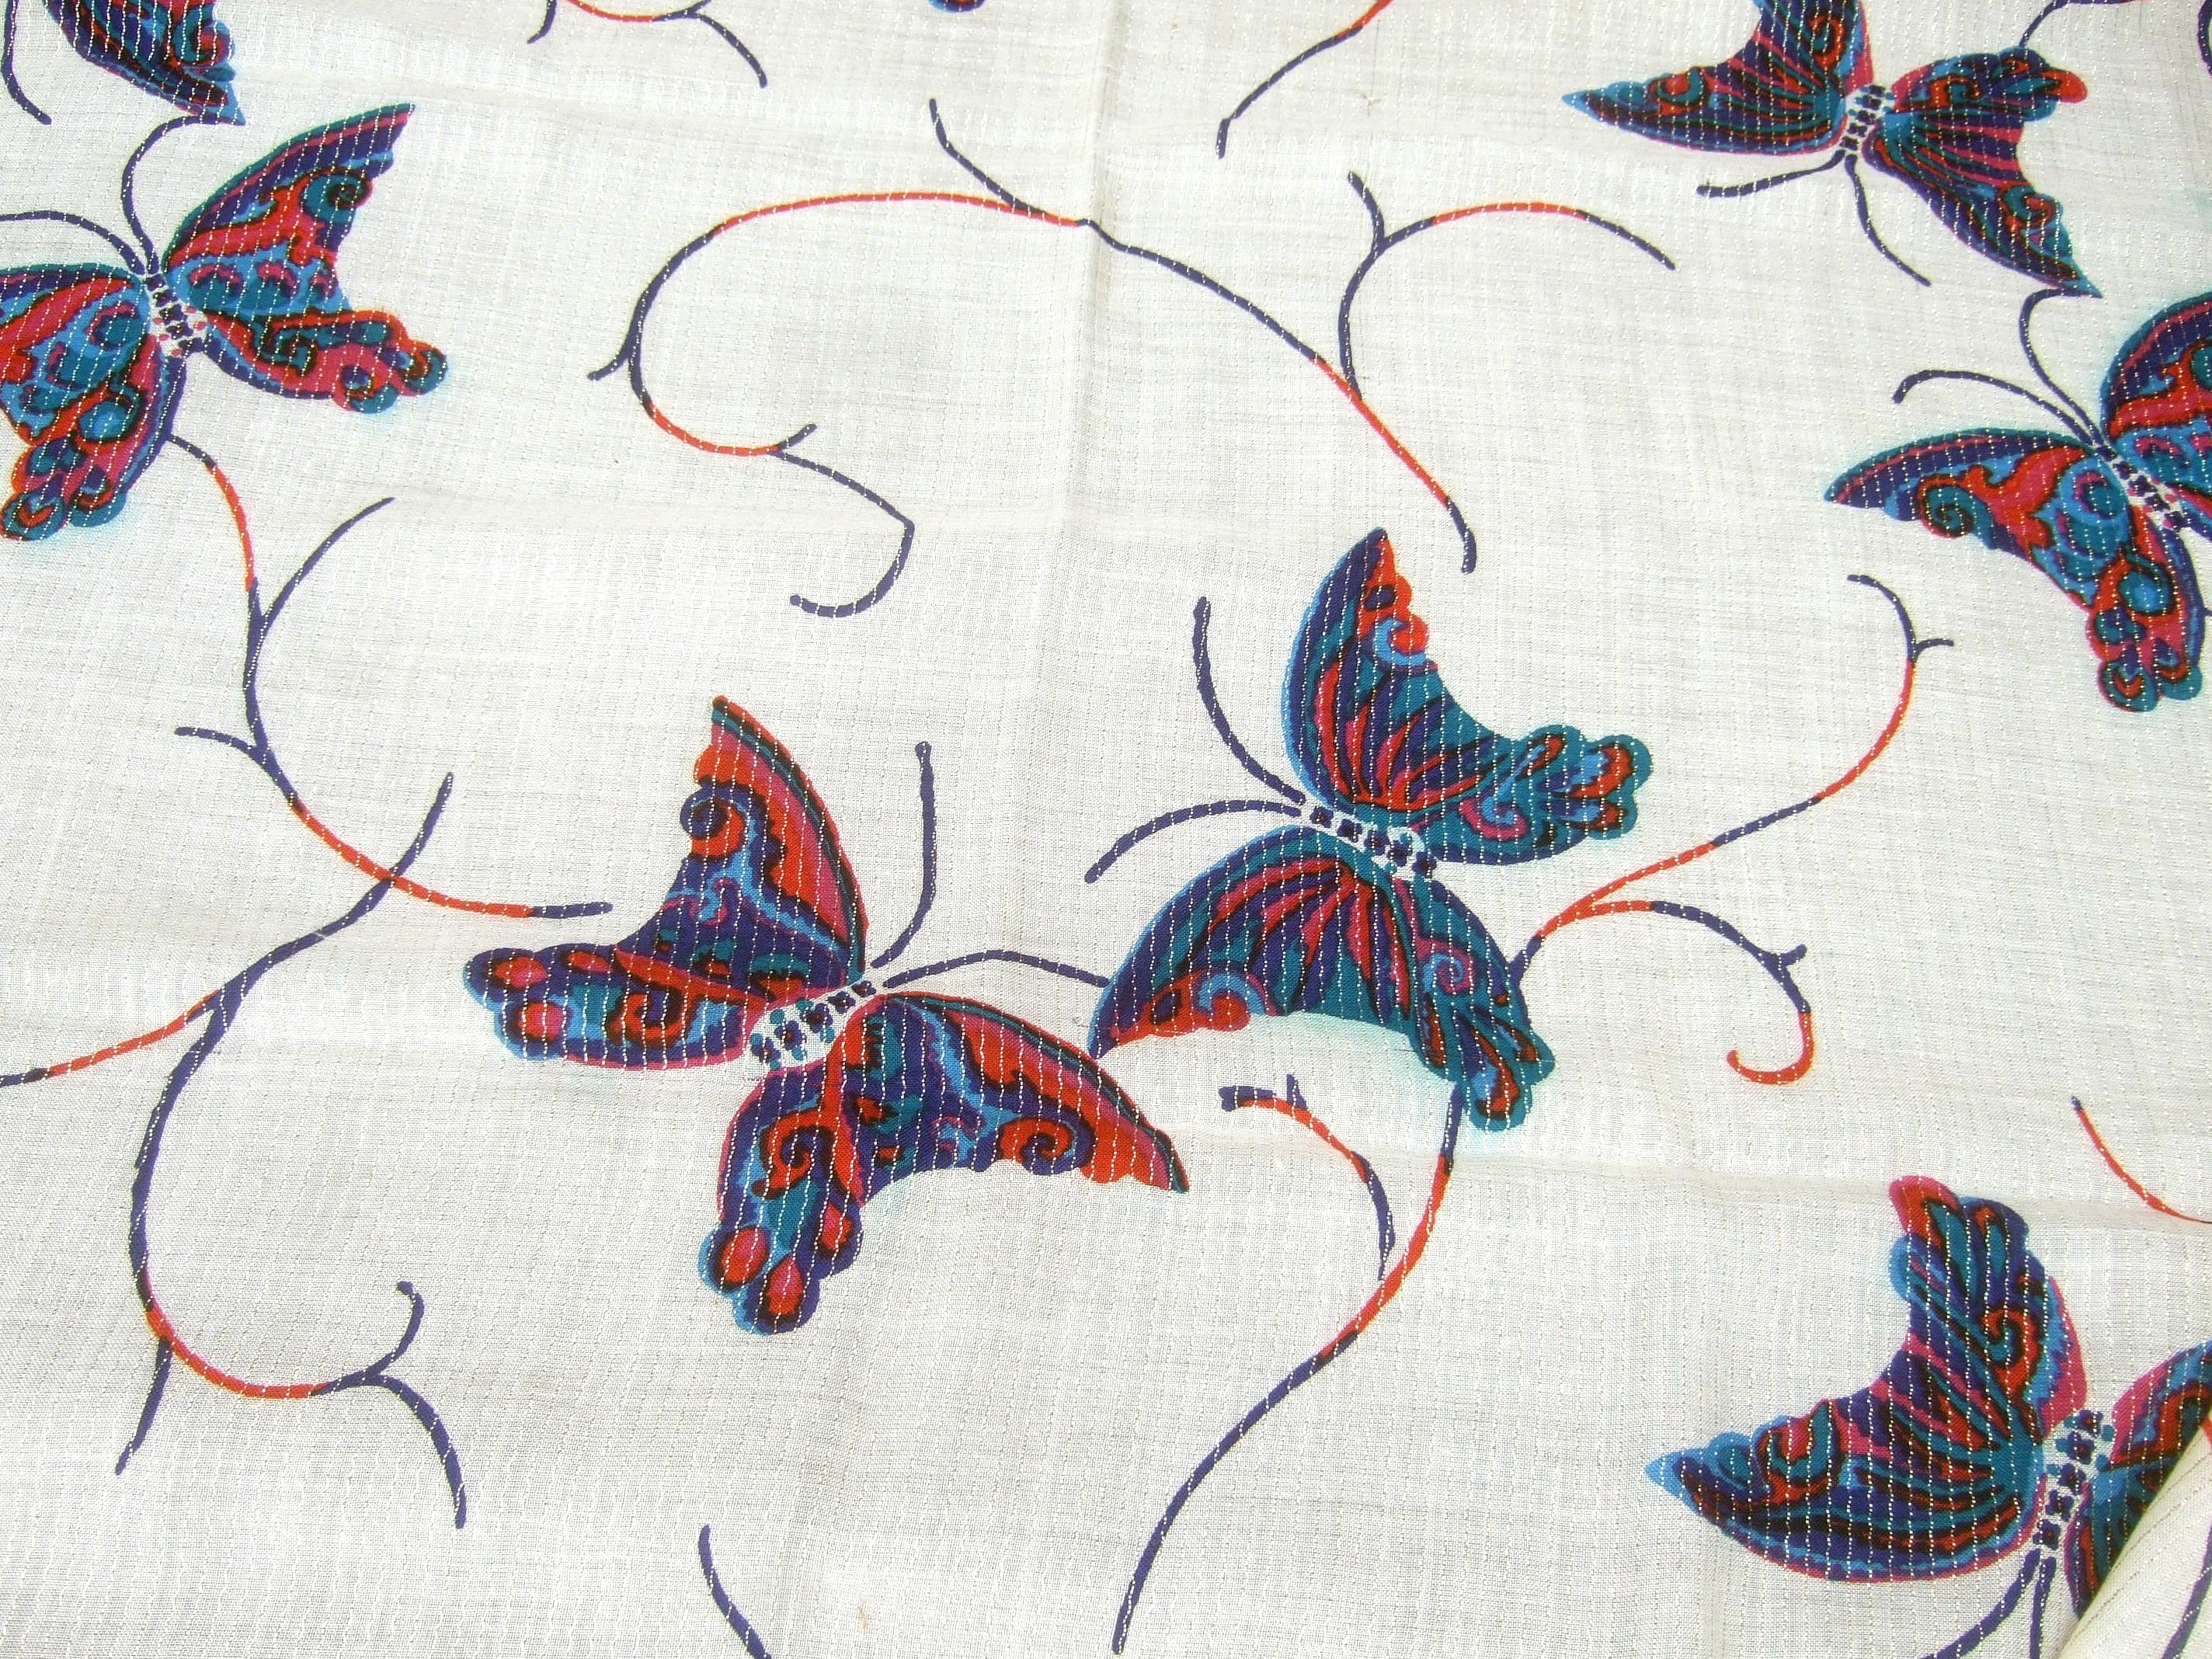 Yves Saint Laurent Large Butterfly Print Scarf - Shawl Wrap 52 x 53 Circa 1970s  2